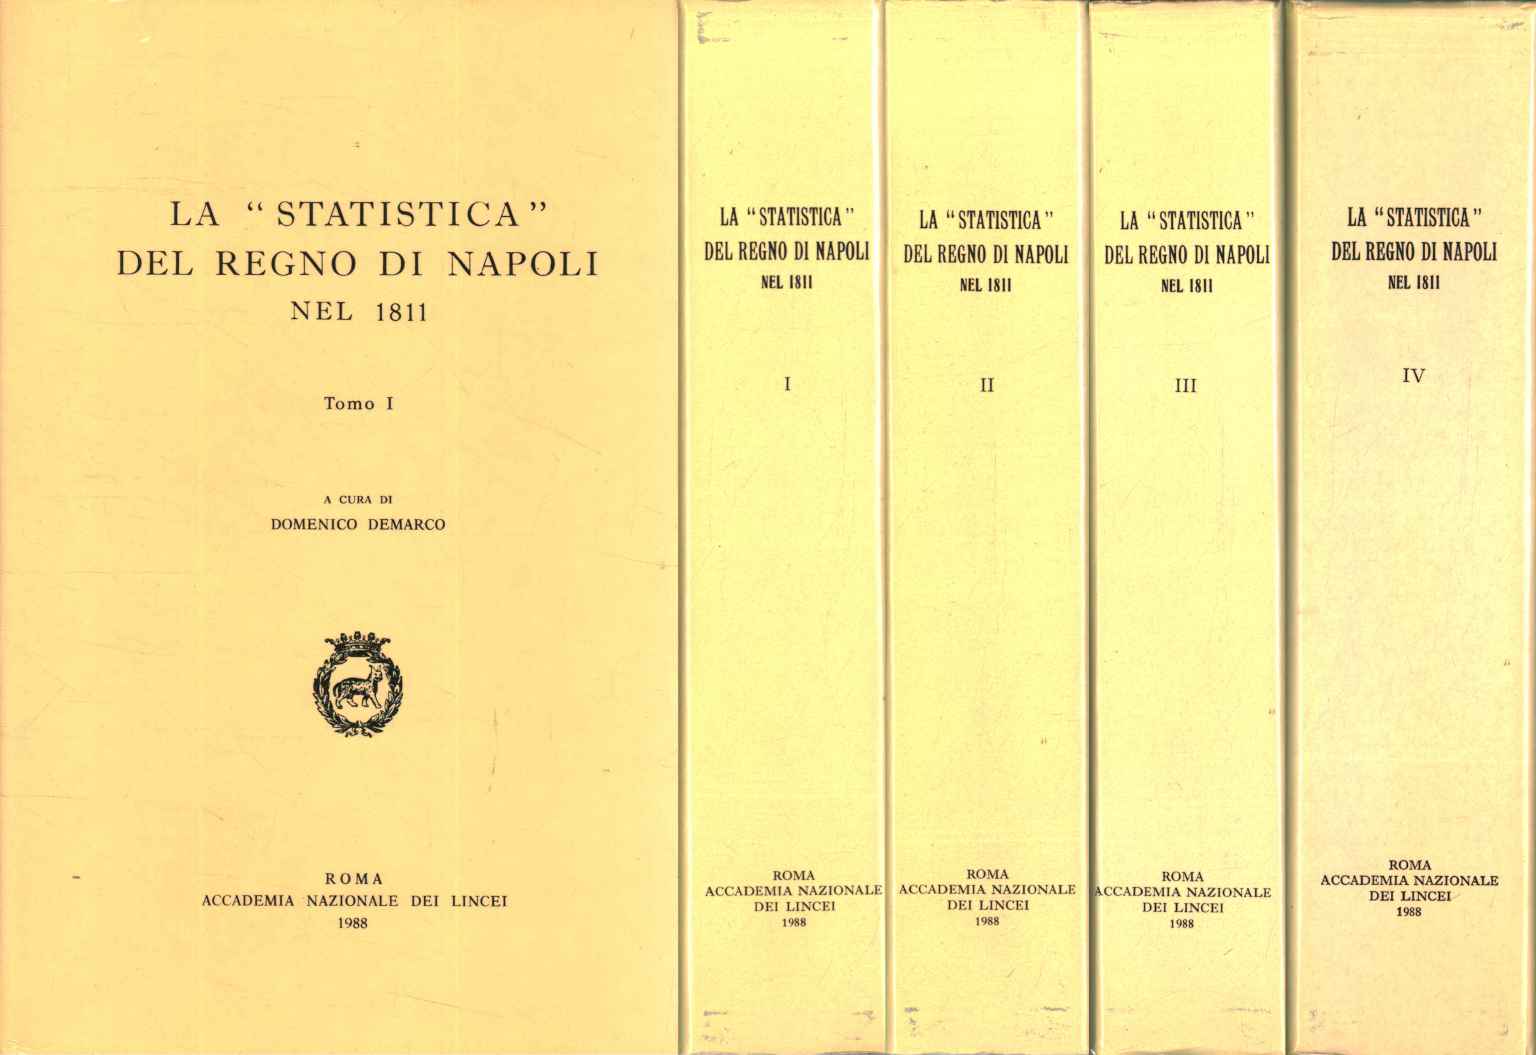 The statistics of the Kingdom of Naples in%,The statistics of the Kingdom of Naples in%,The statistics of the Kingdom of Naples in%